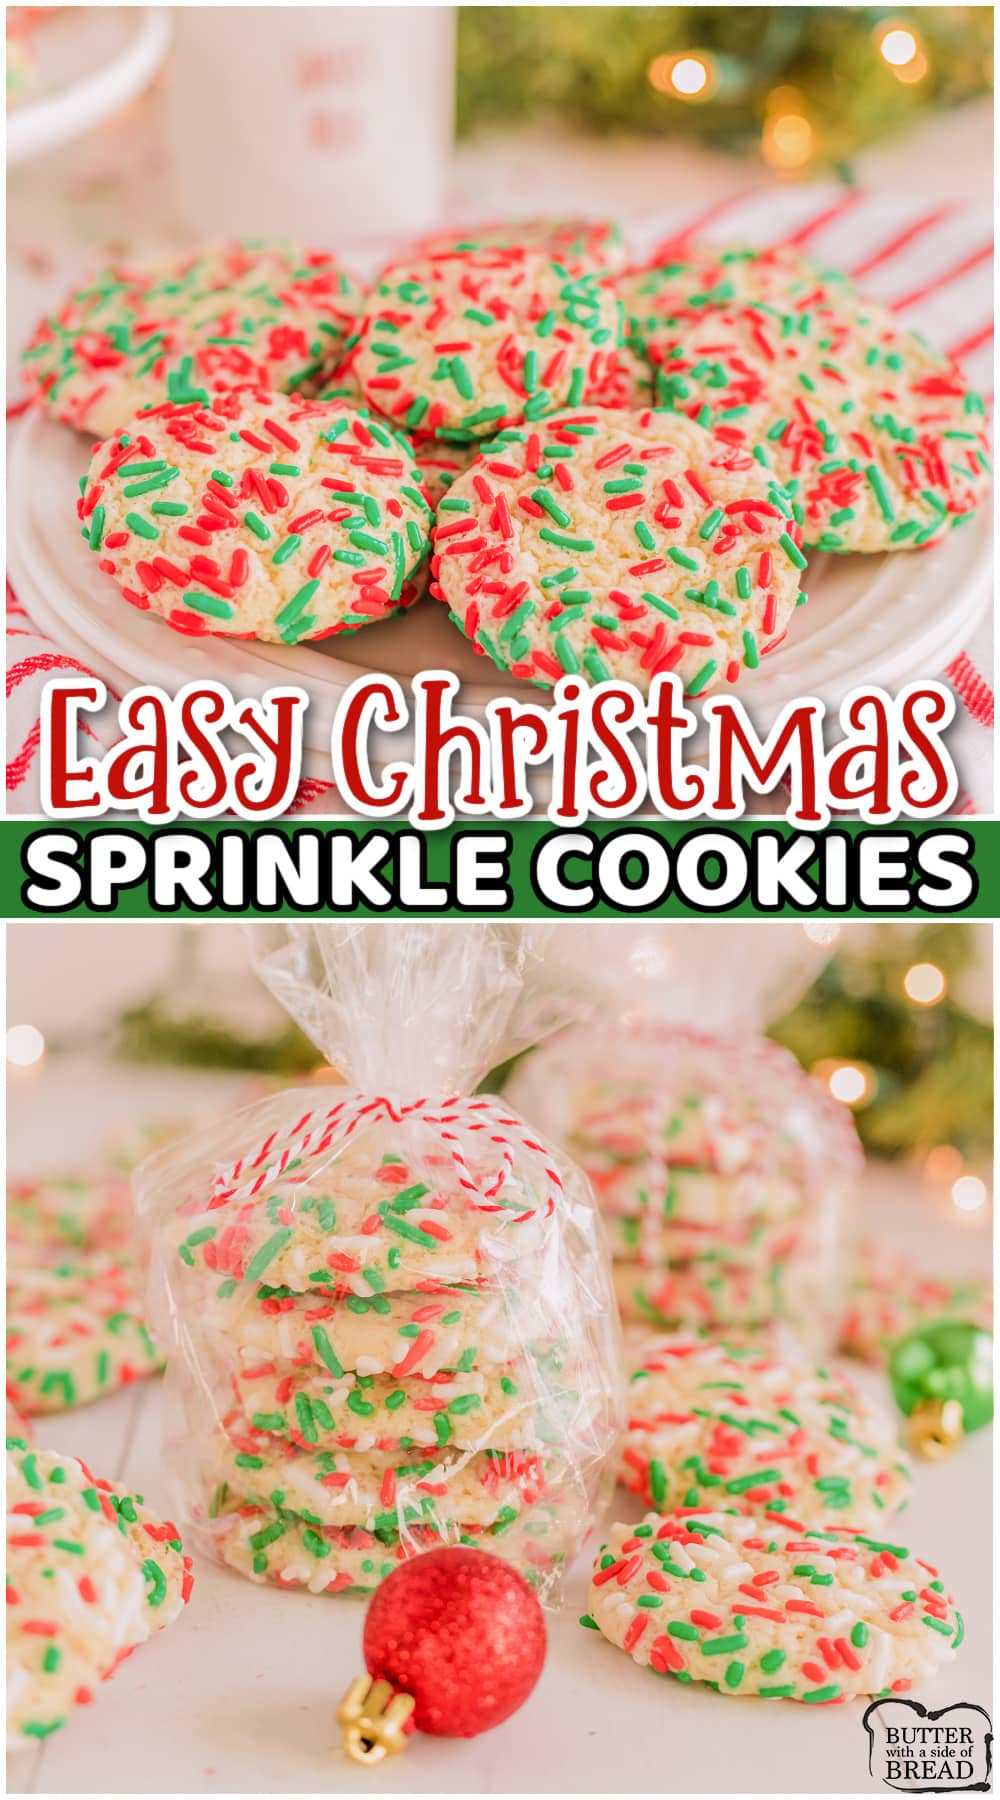 Christmas Sprinkle Cookies are a soft and chewy vanilla sugar cookie covered with red and green sprinkles. Just like the sprinkle cookies made at a bakery, these Christmas Cookies are deliciously festive!